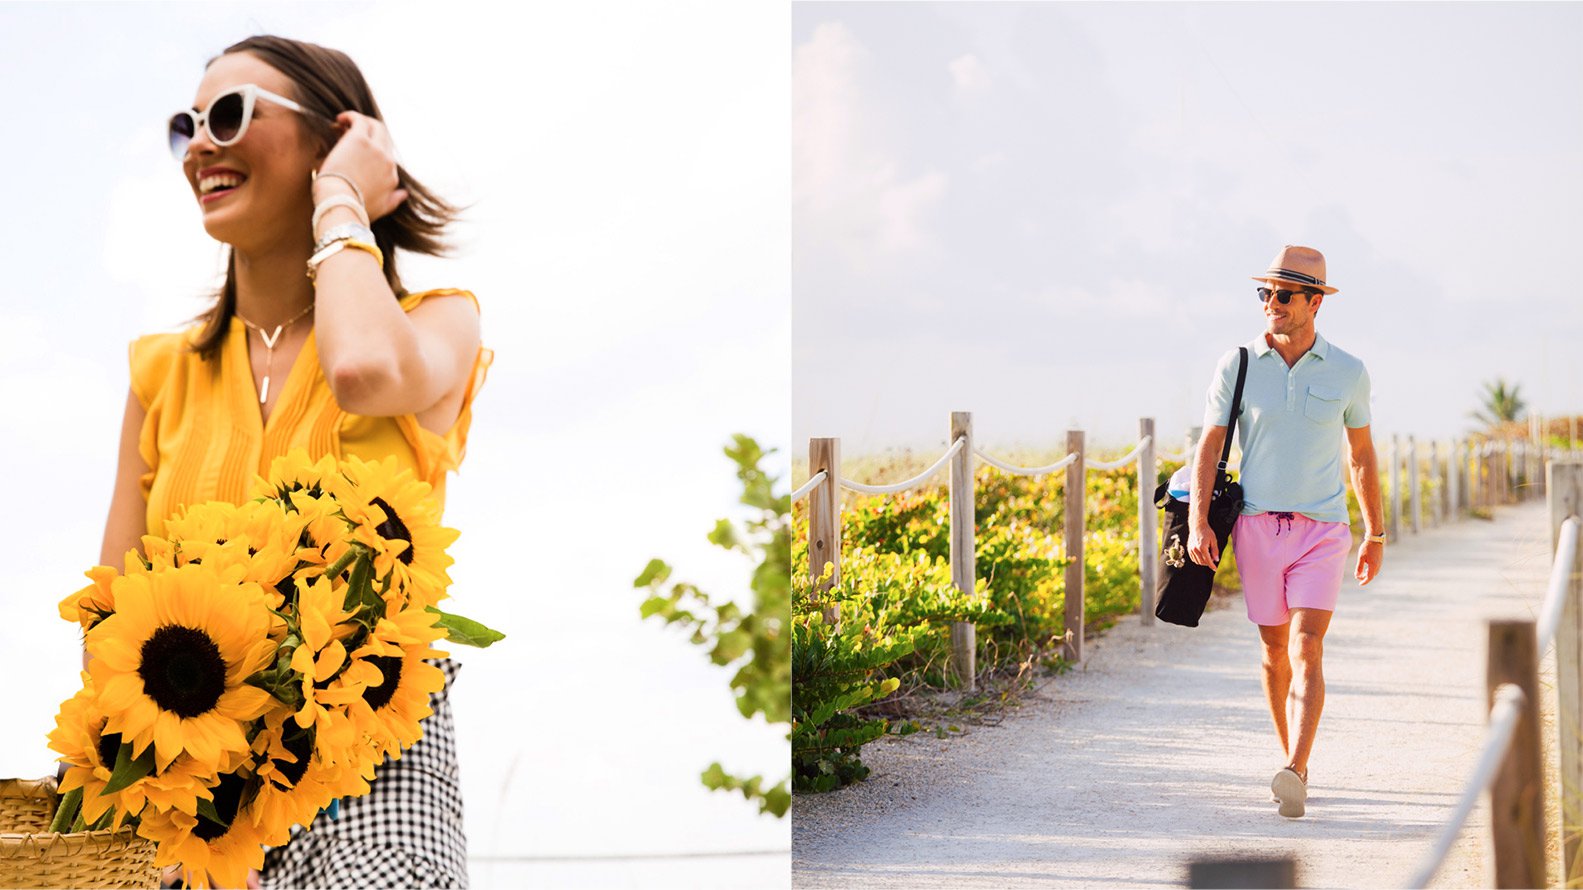 Jacober Creative Identity and Campaign for the Town of Surfside Florida - Photo of campaign photography, Left: Woman riding a bike with sunflowers. Right: Man walks down the Surfside path holding a beach bag and wearing sunglasses.